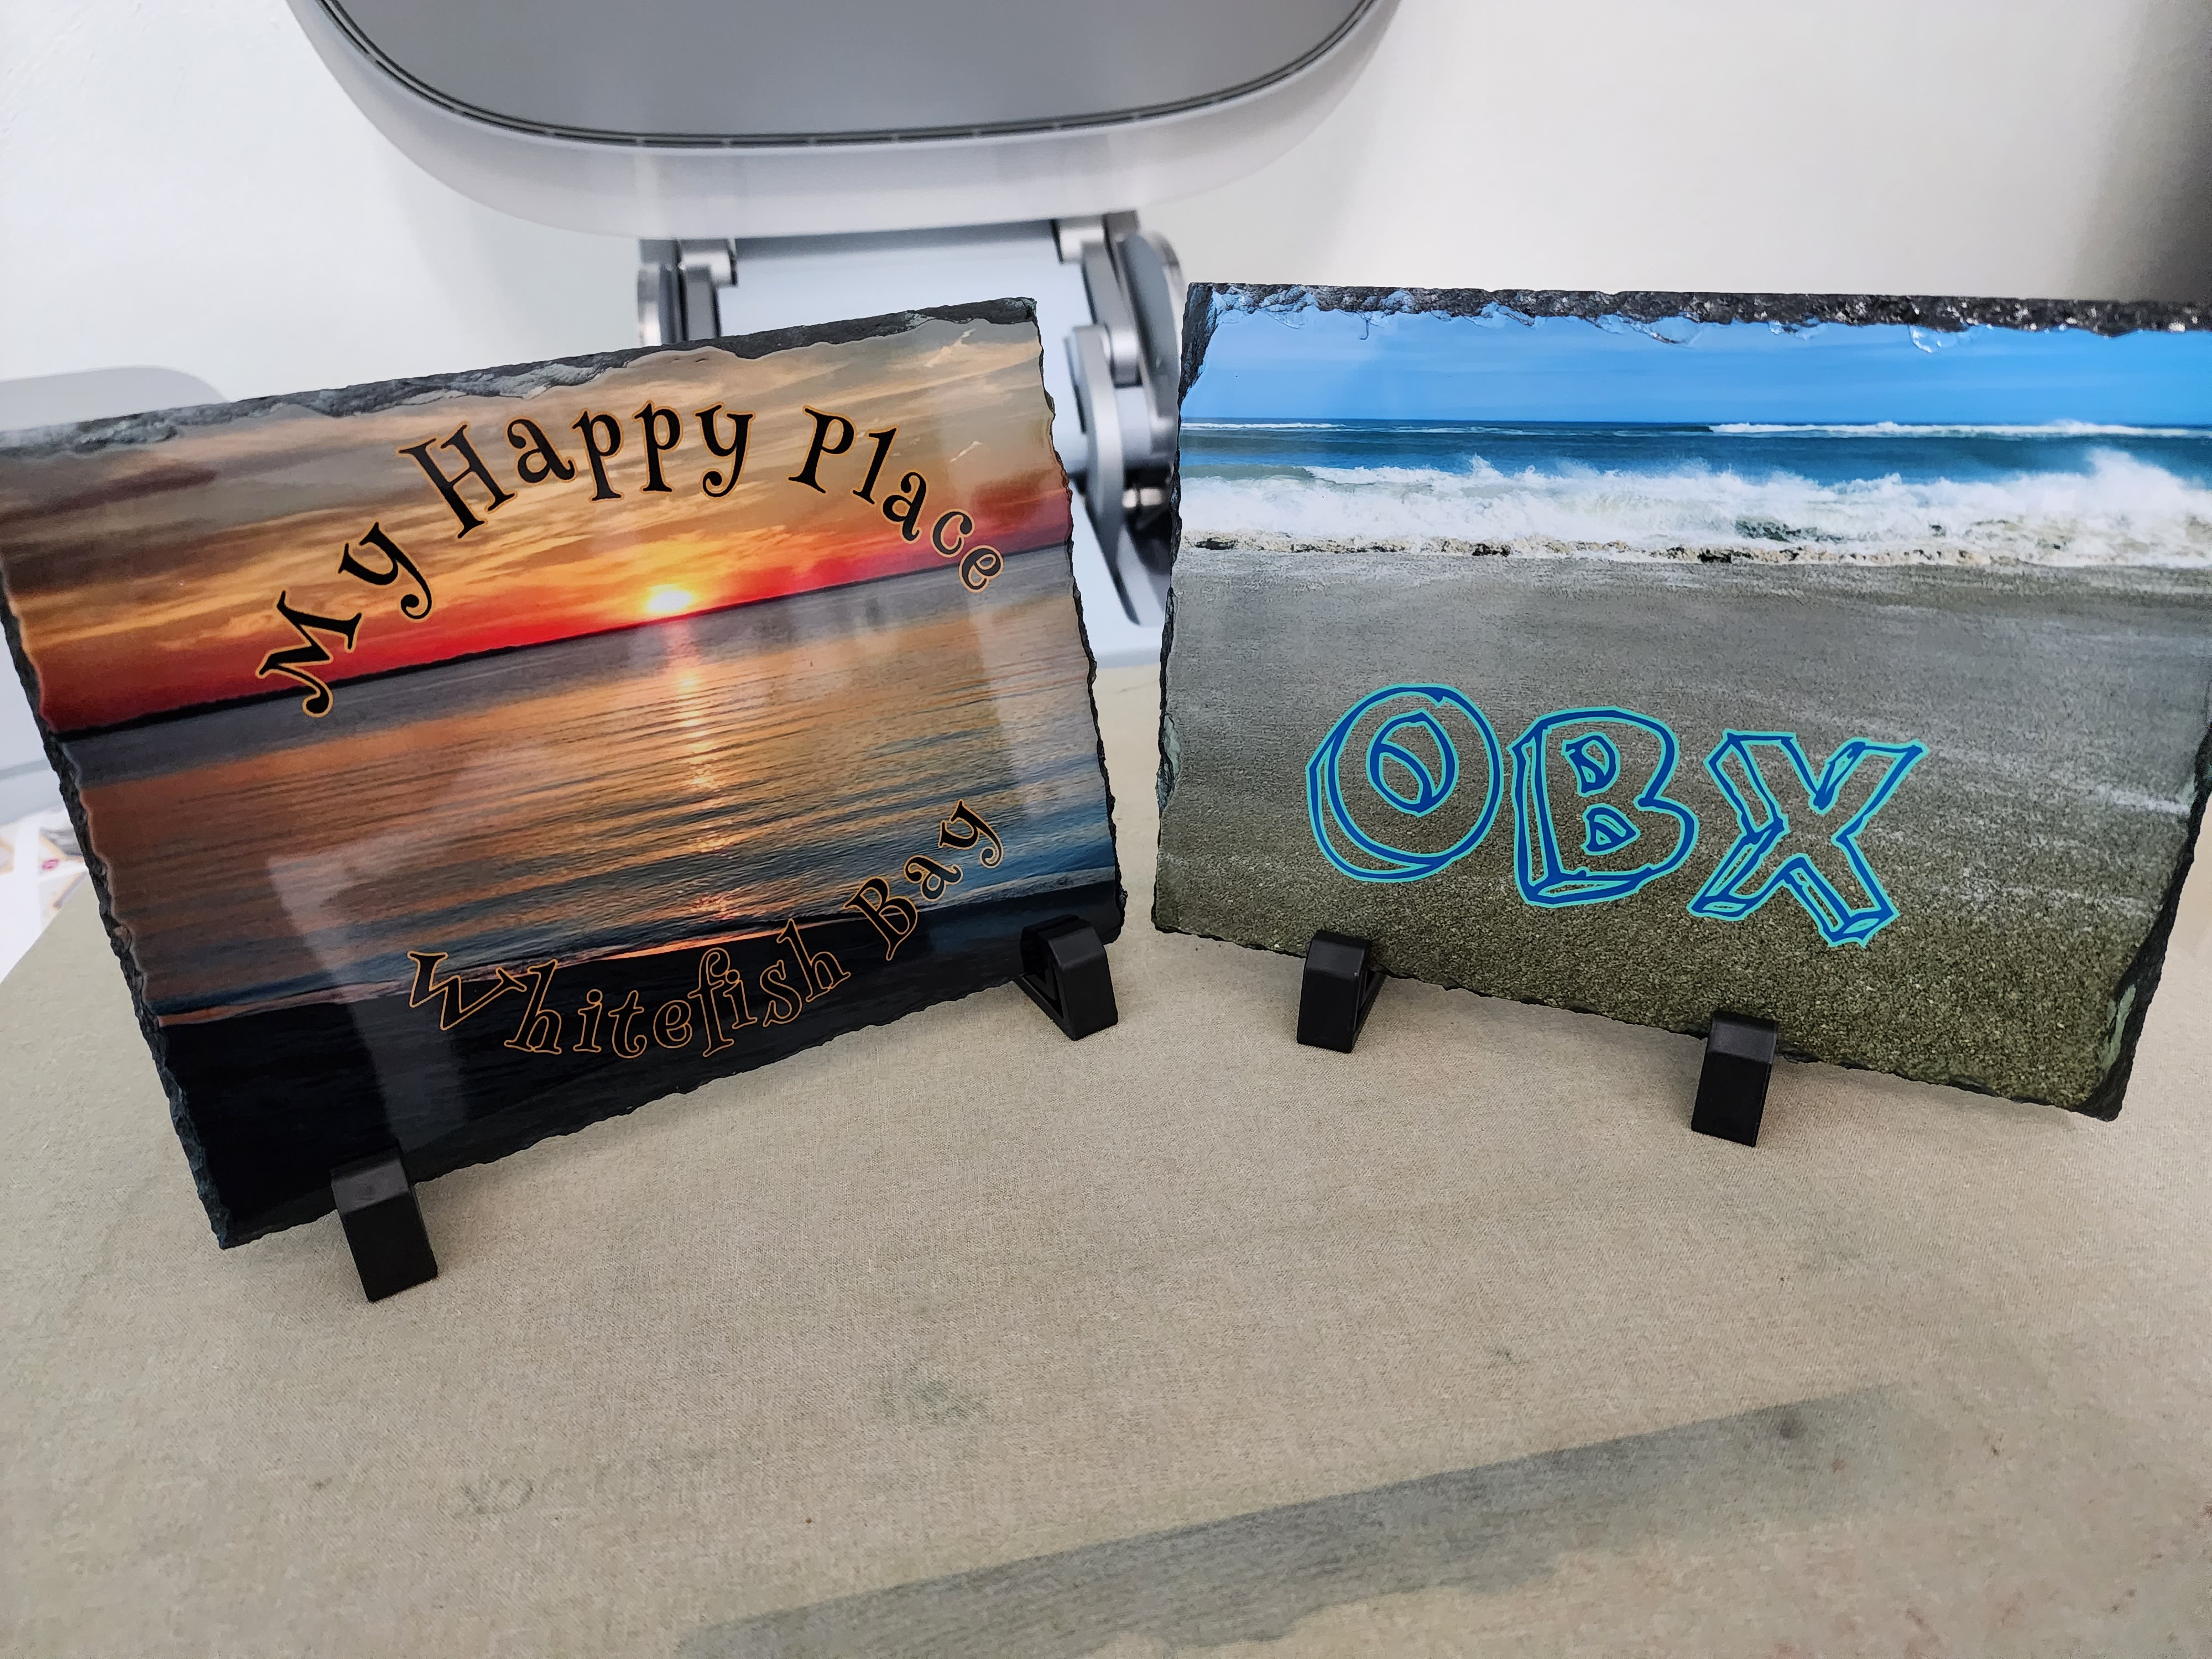 Using photos I took from different beach visits I made these photo slates to sell at craft fair